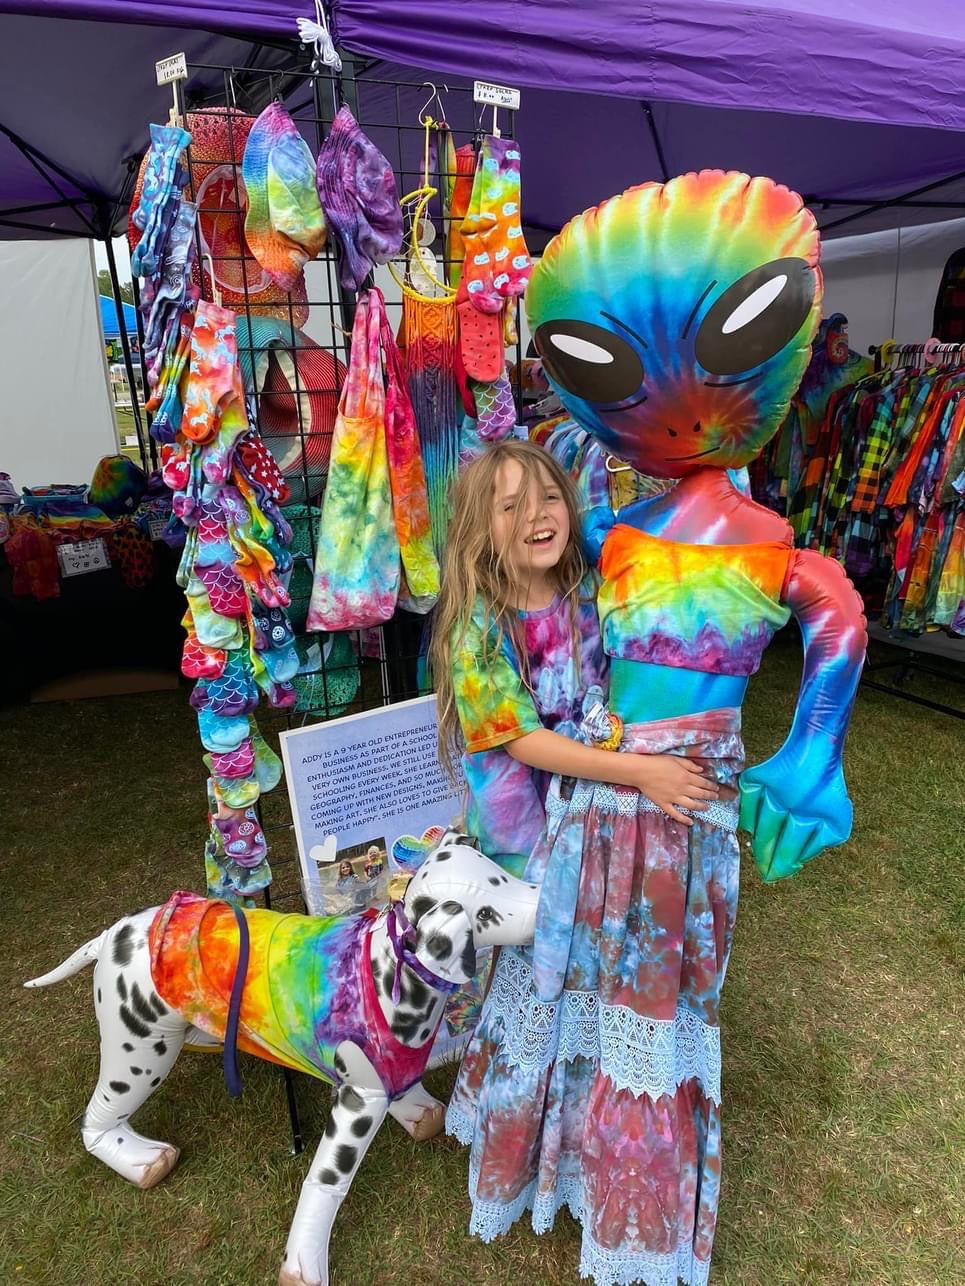 Your very own Jamie the alien! 63” giant - you choose rainbow or tie-dye